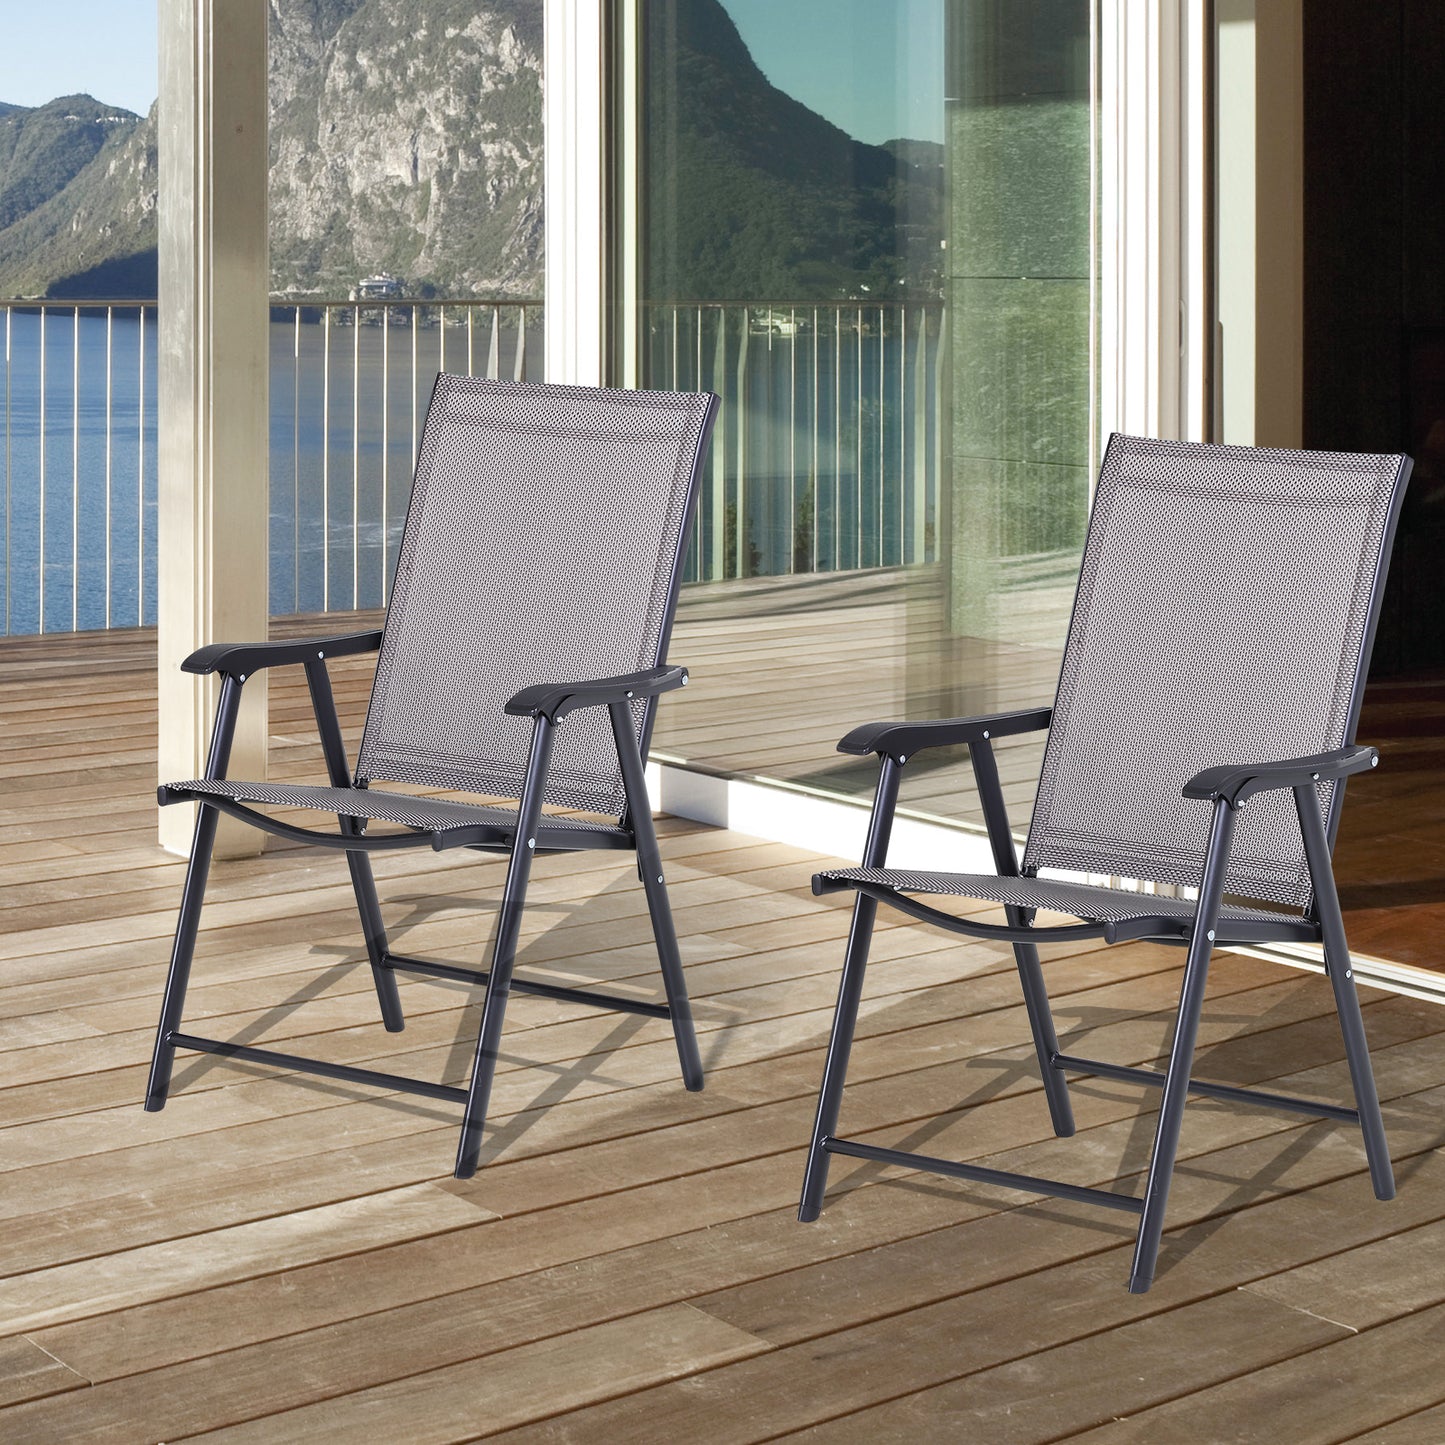 Outsunny Set of 2 Foldable Outdoor Garden Chairs Steel Frame Grey